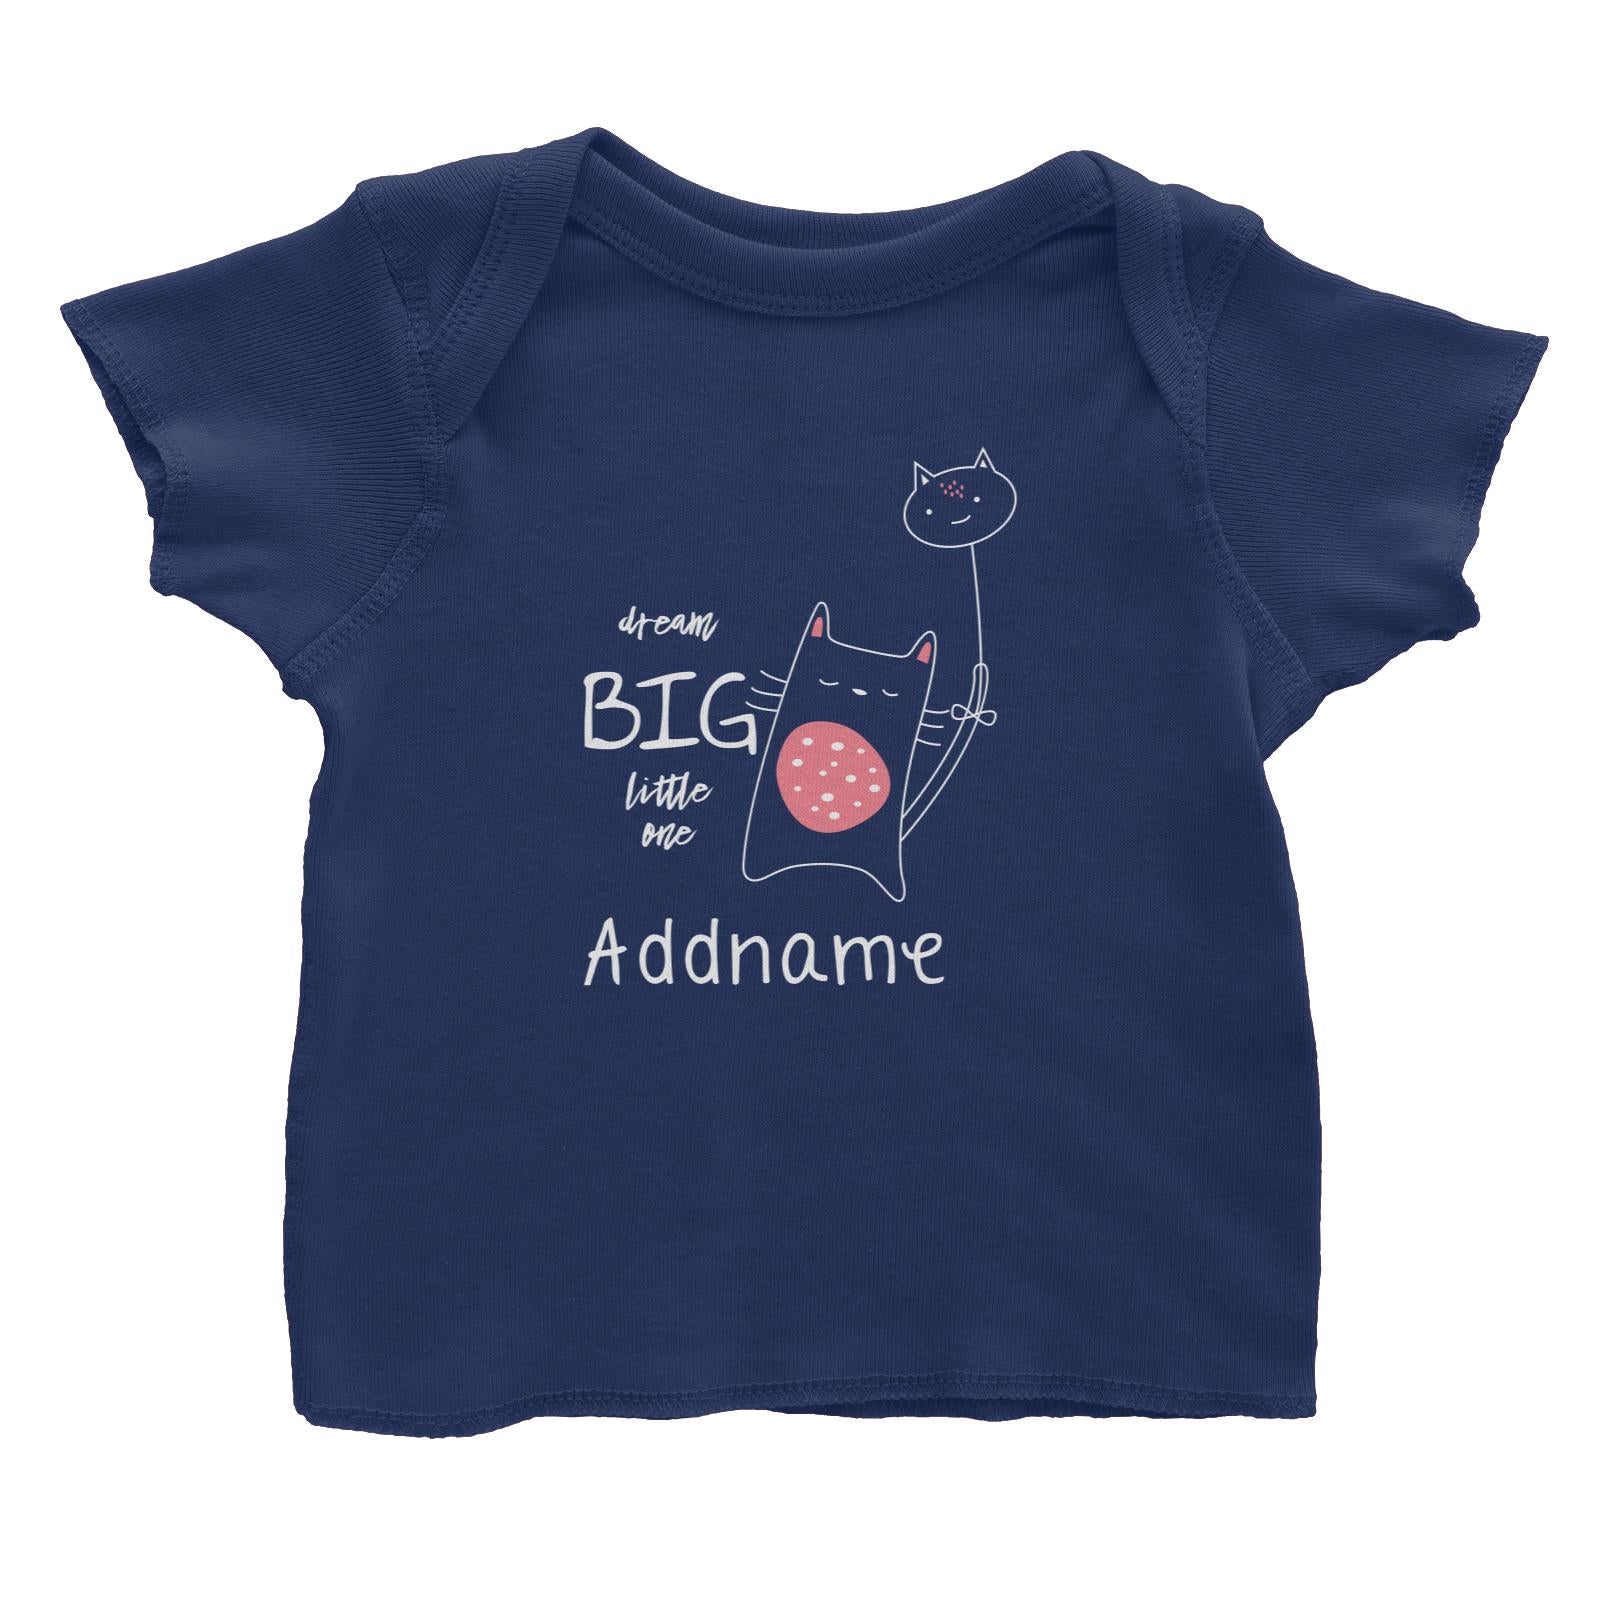 Cute Animals and Friends Series 2 Cat Dream Big Little One Addname Baby T-Shirt